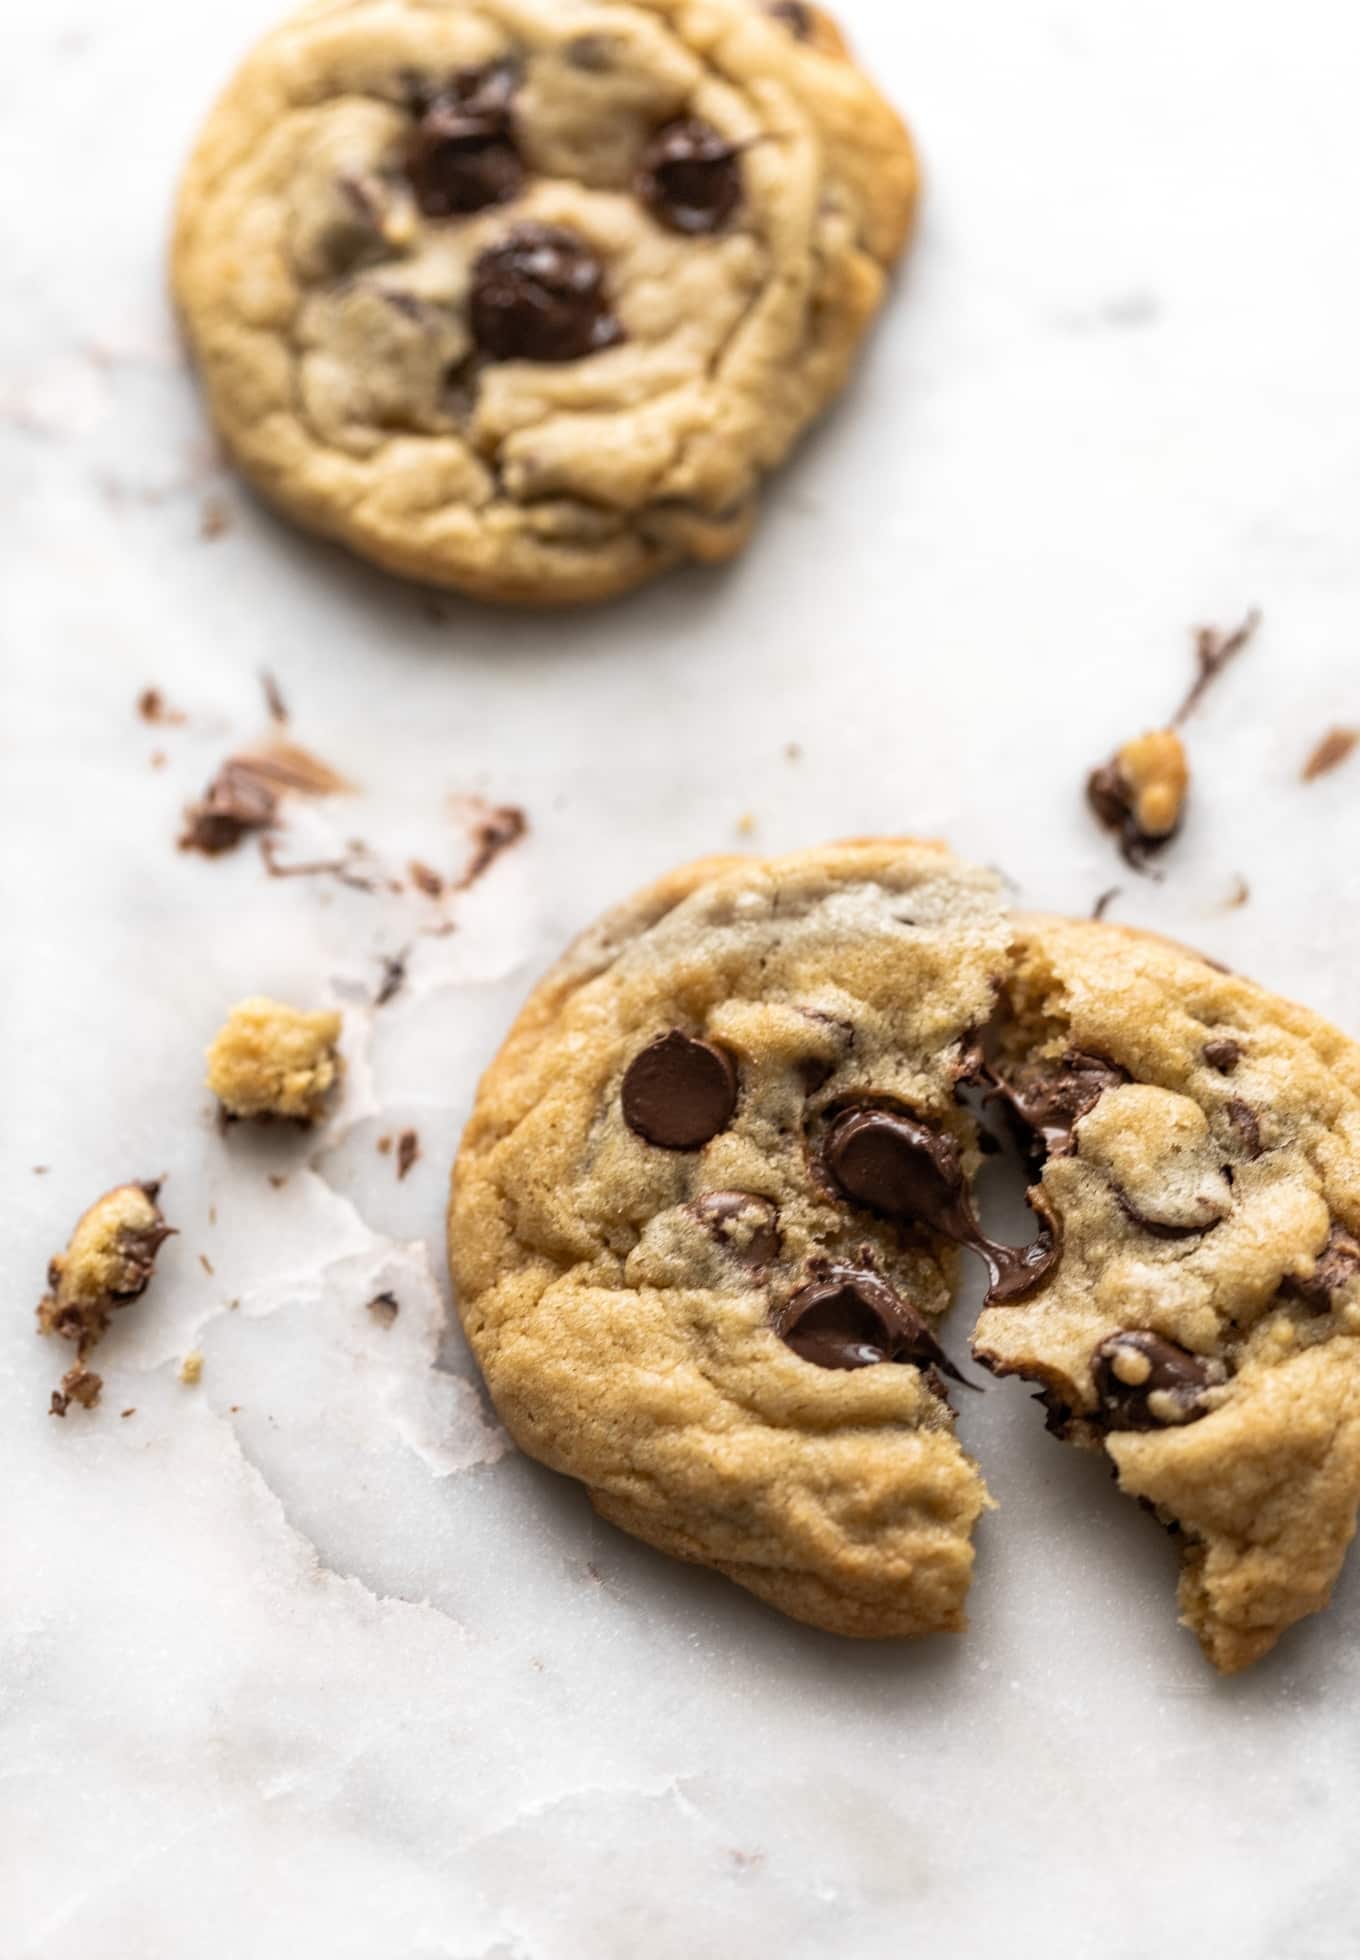 https://thewholecook.com/wp-content/uploads/2016/02/Ultimate-Chocolate-Chip-Cookies-by-The-Whole-Cook-vertical-1.jpg